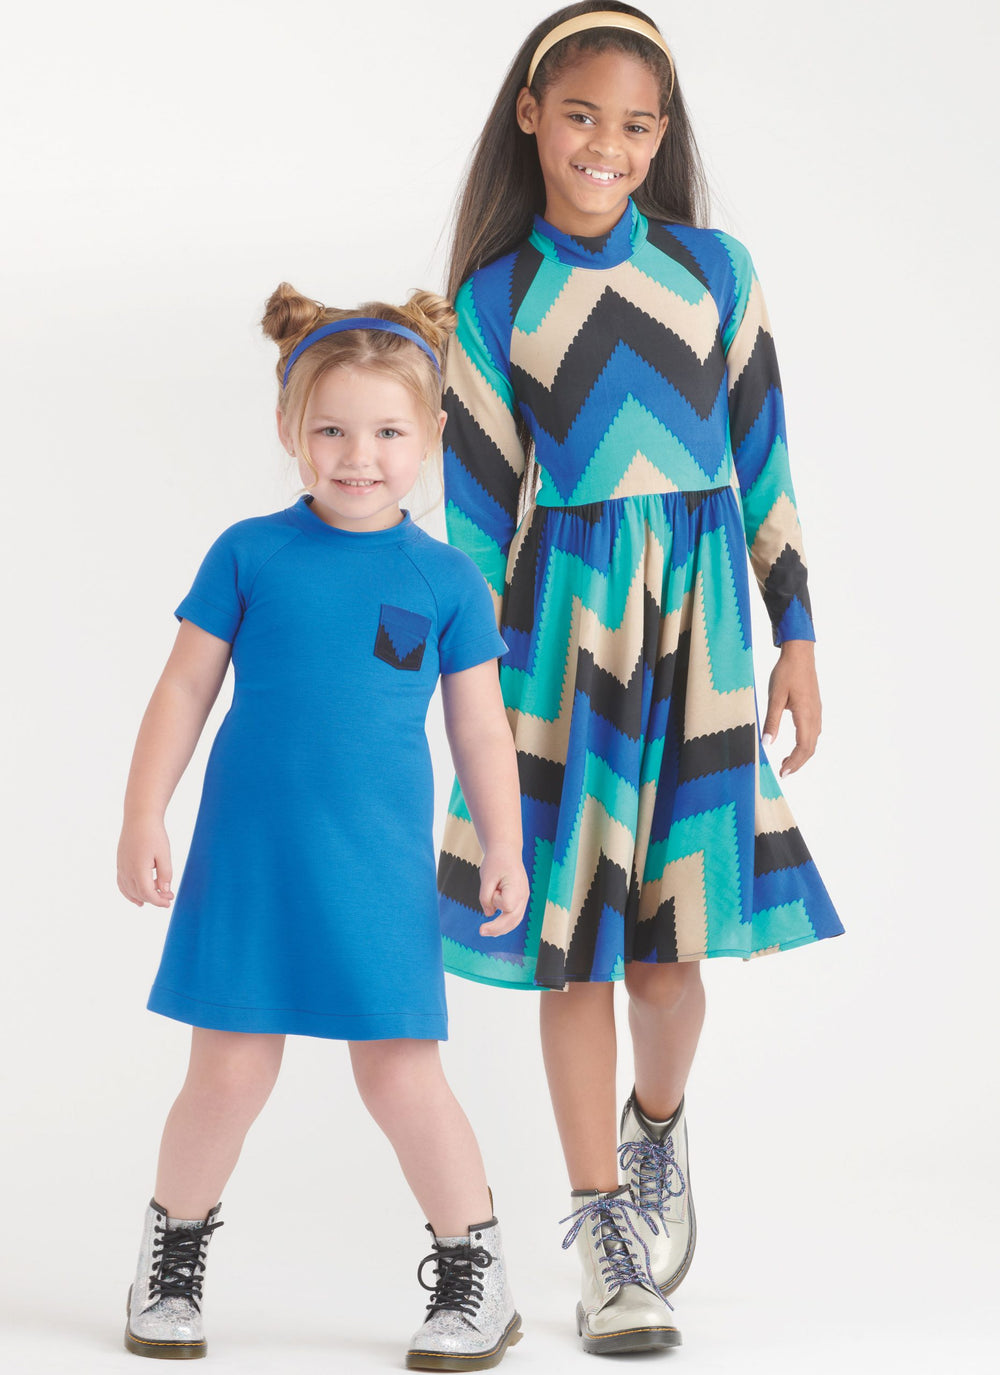 New Look Child/Teen Knit Dresses N6773